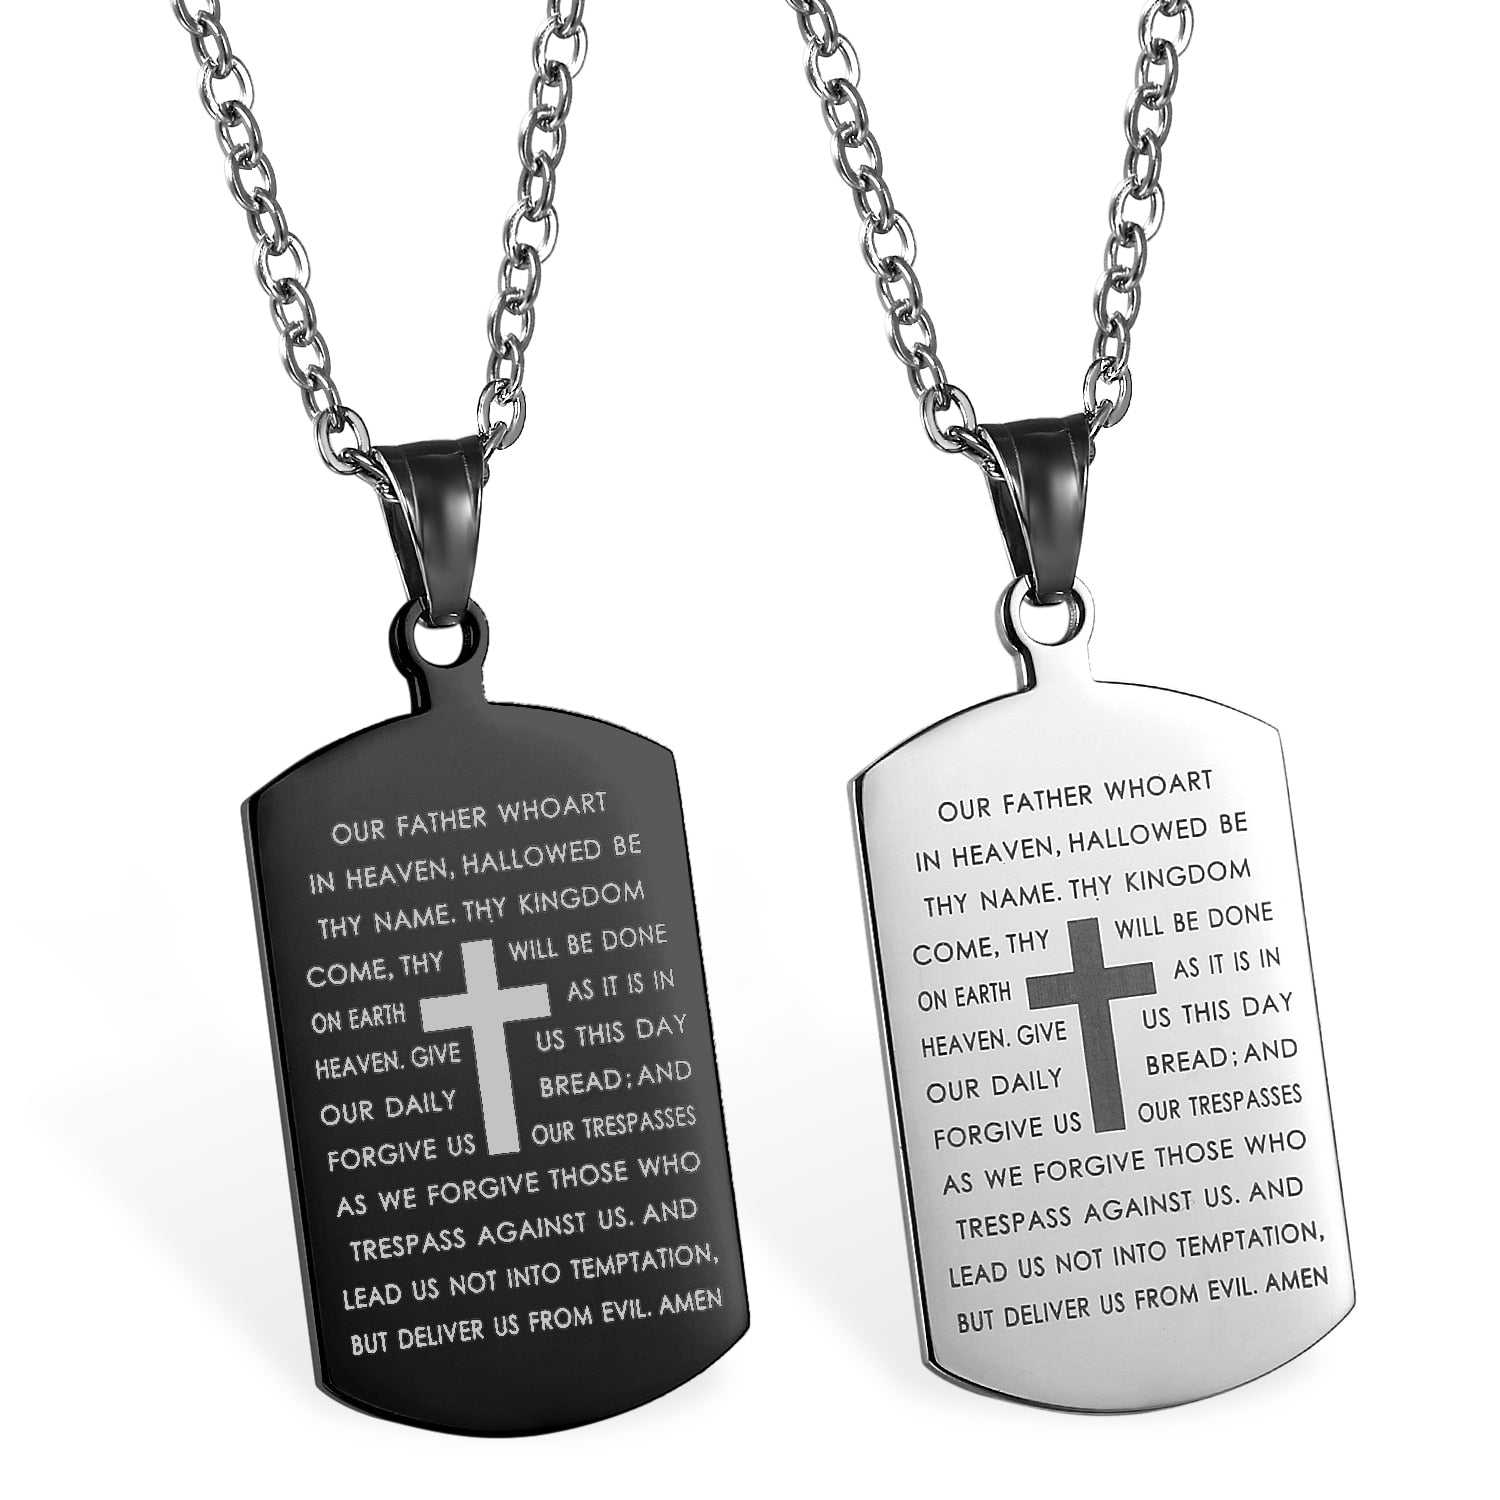 Lord's Prayer Cross Dog Tag Necklace